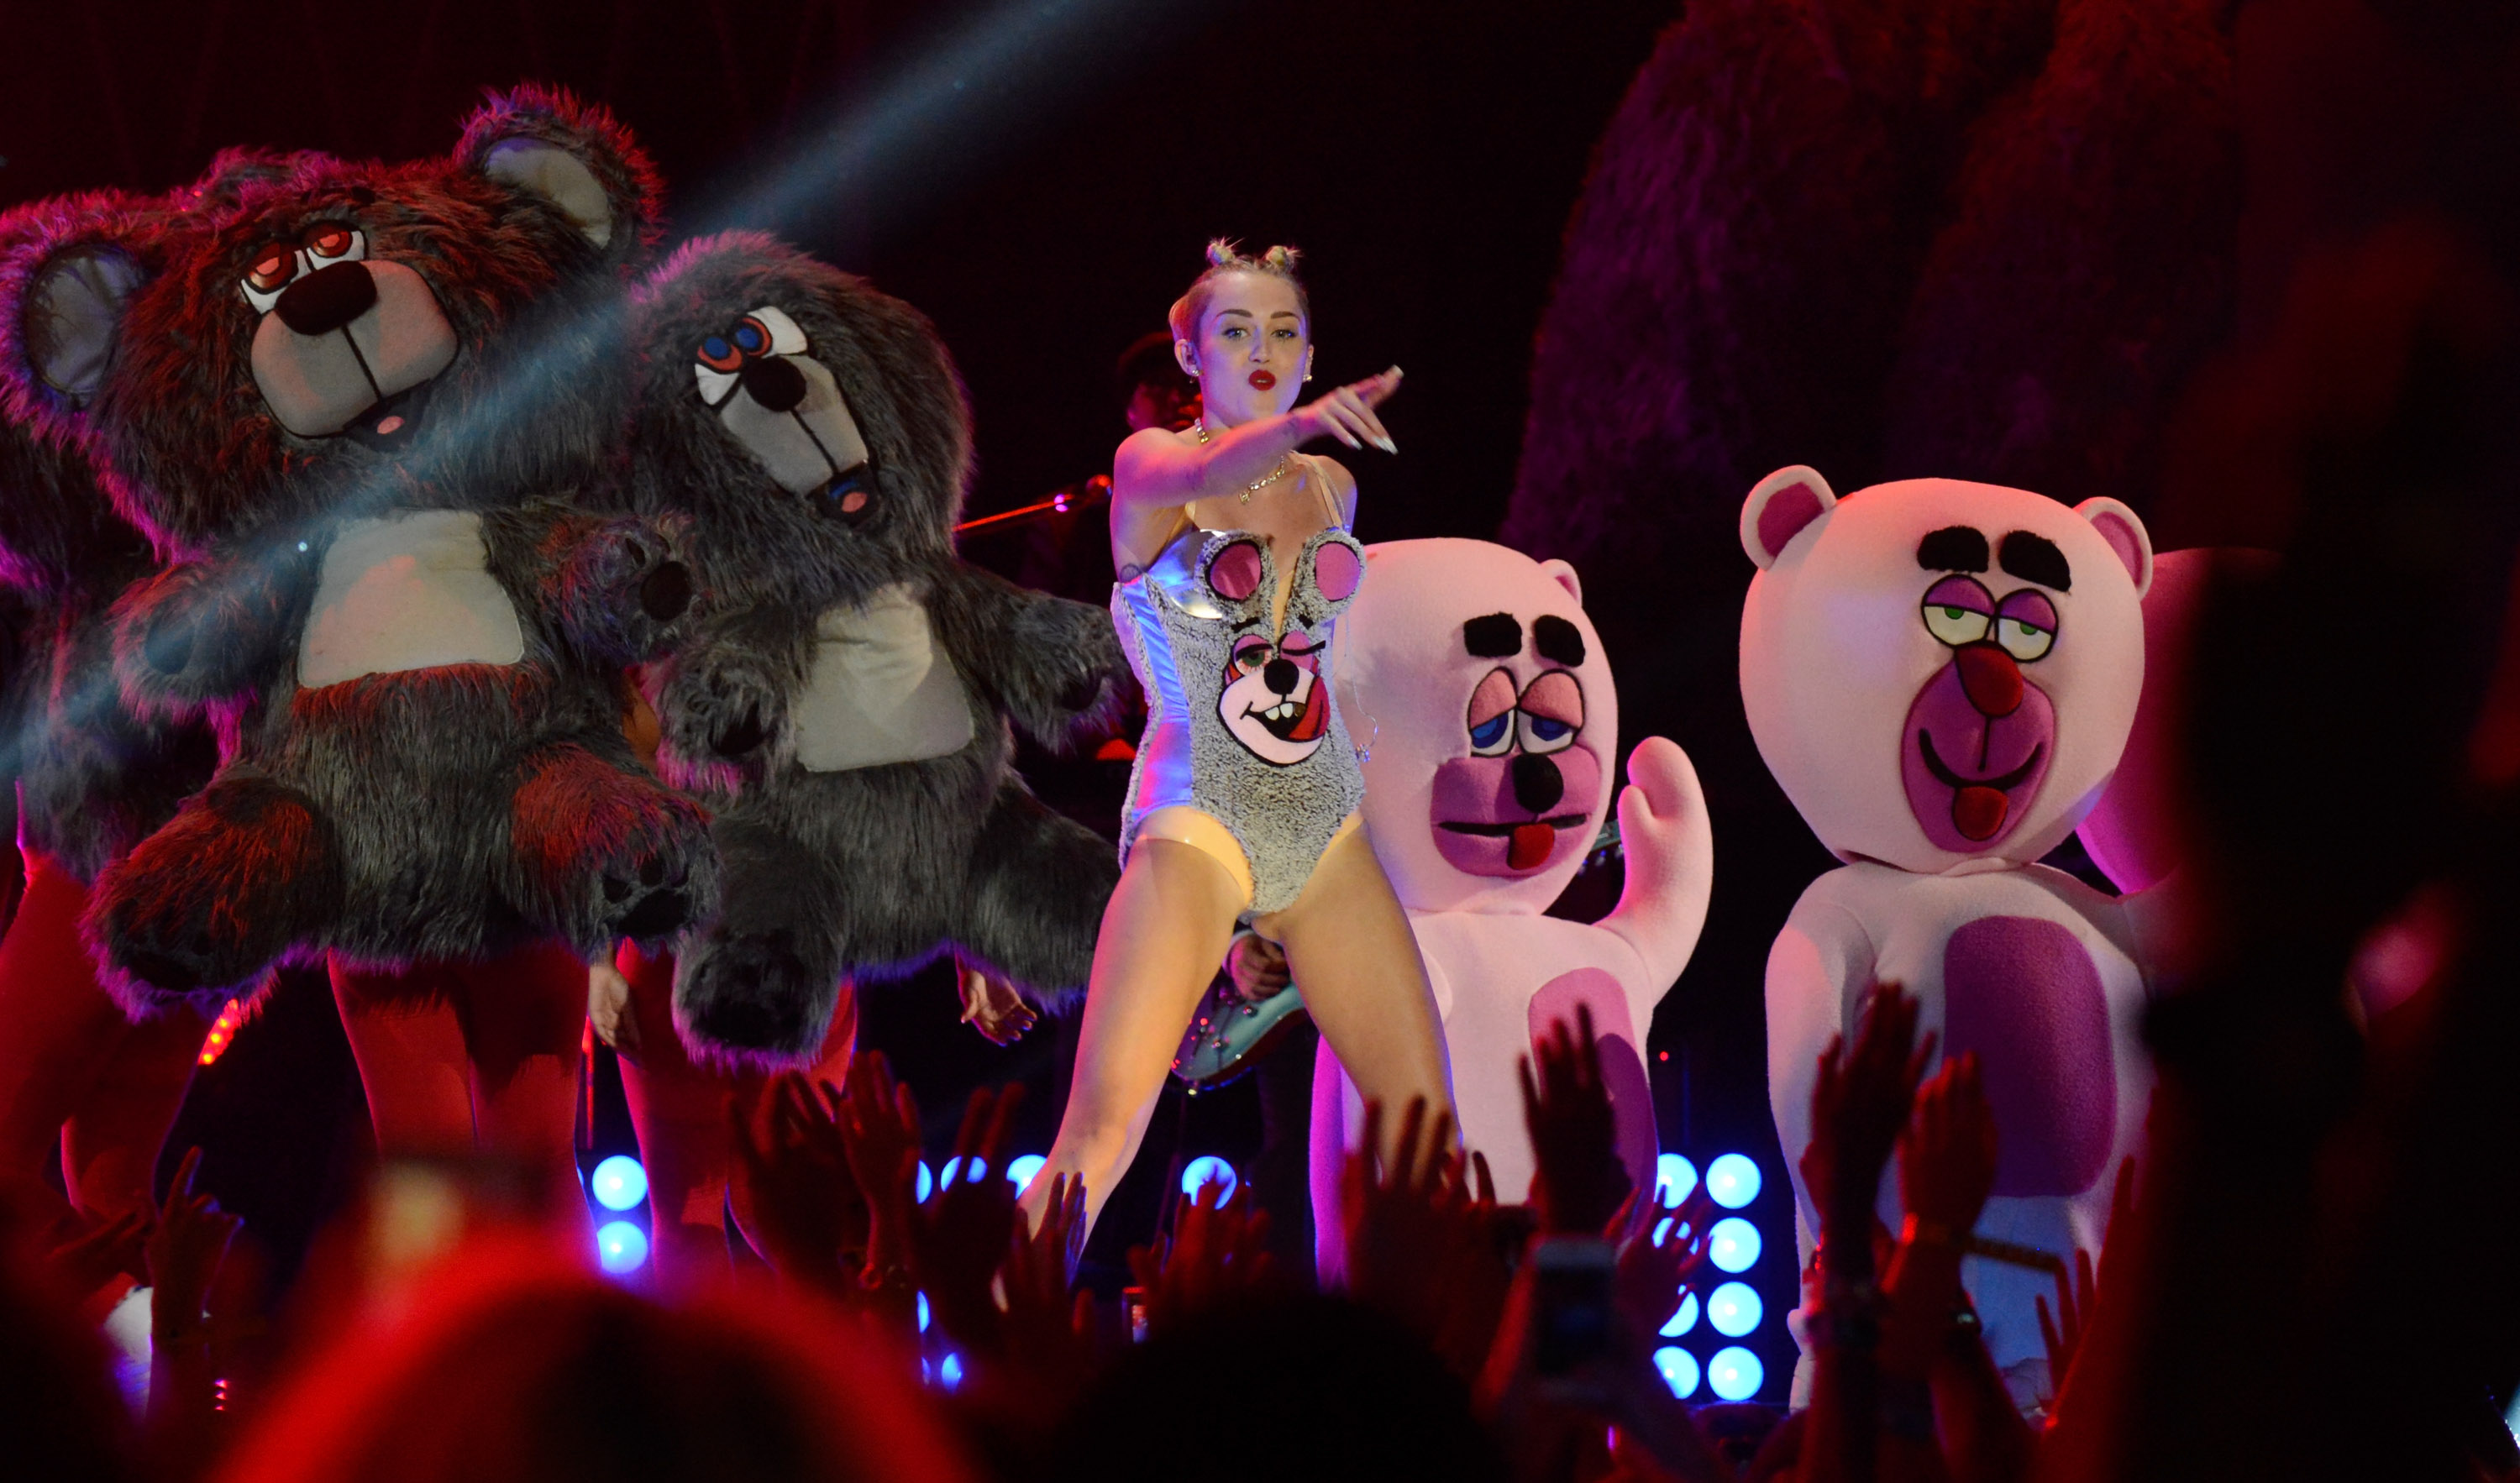 Miley Cyrus performs during the 2013 MTV Video Music Awards on August 25, 2013 in New York City.